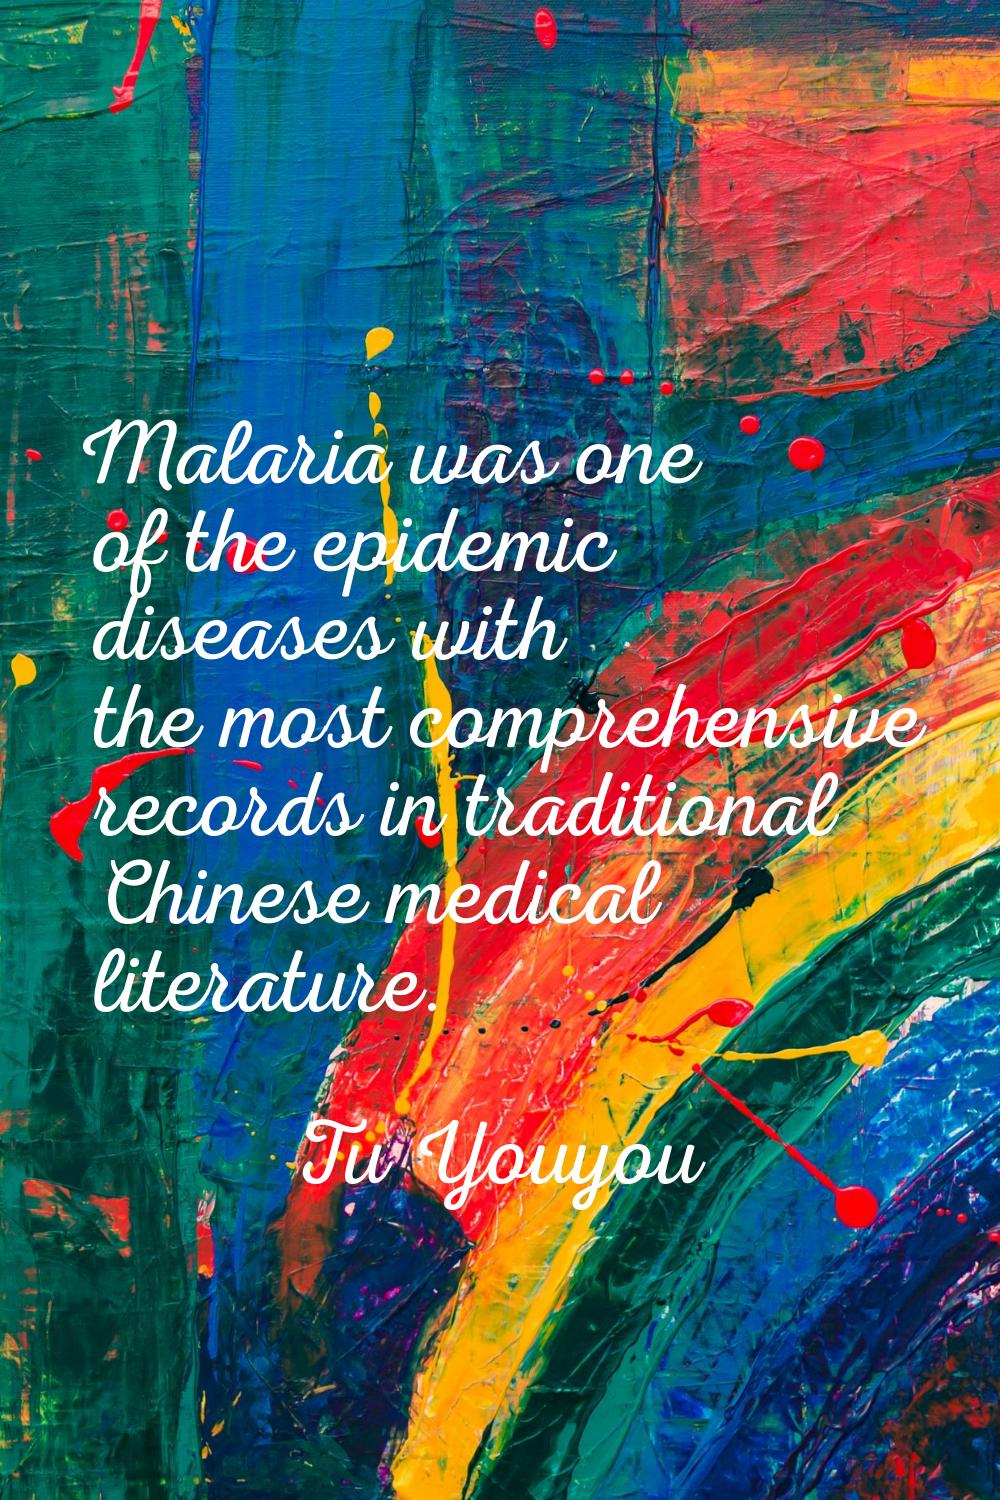 Malaria was one of the epidemic diseases with the most comprehensive records in traditional Chinese